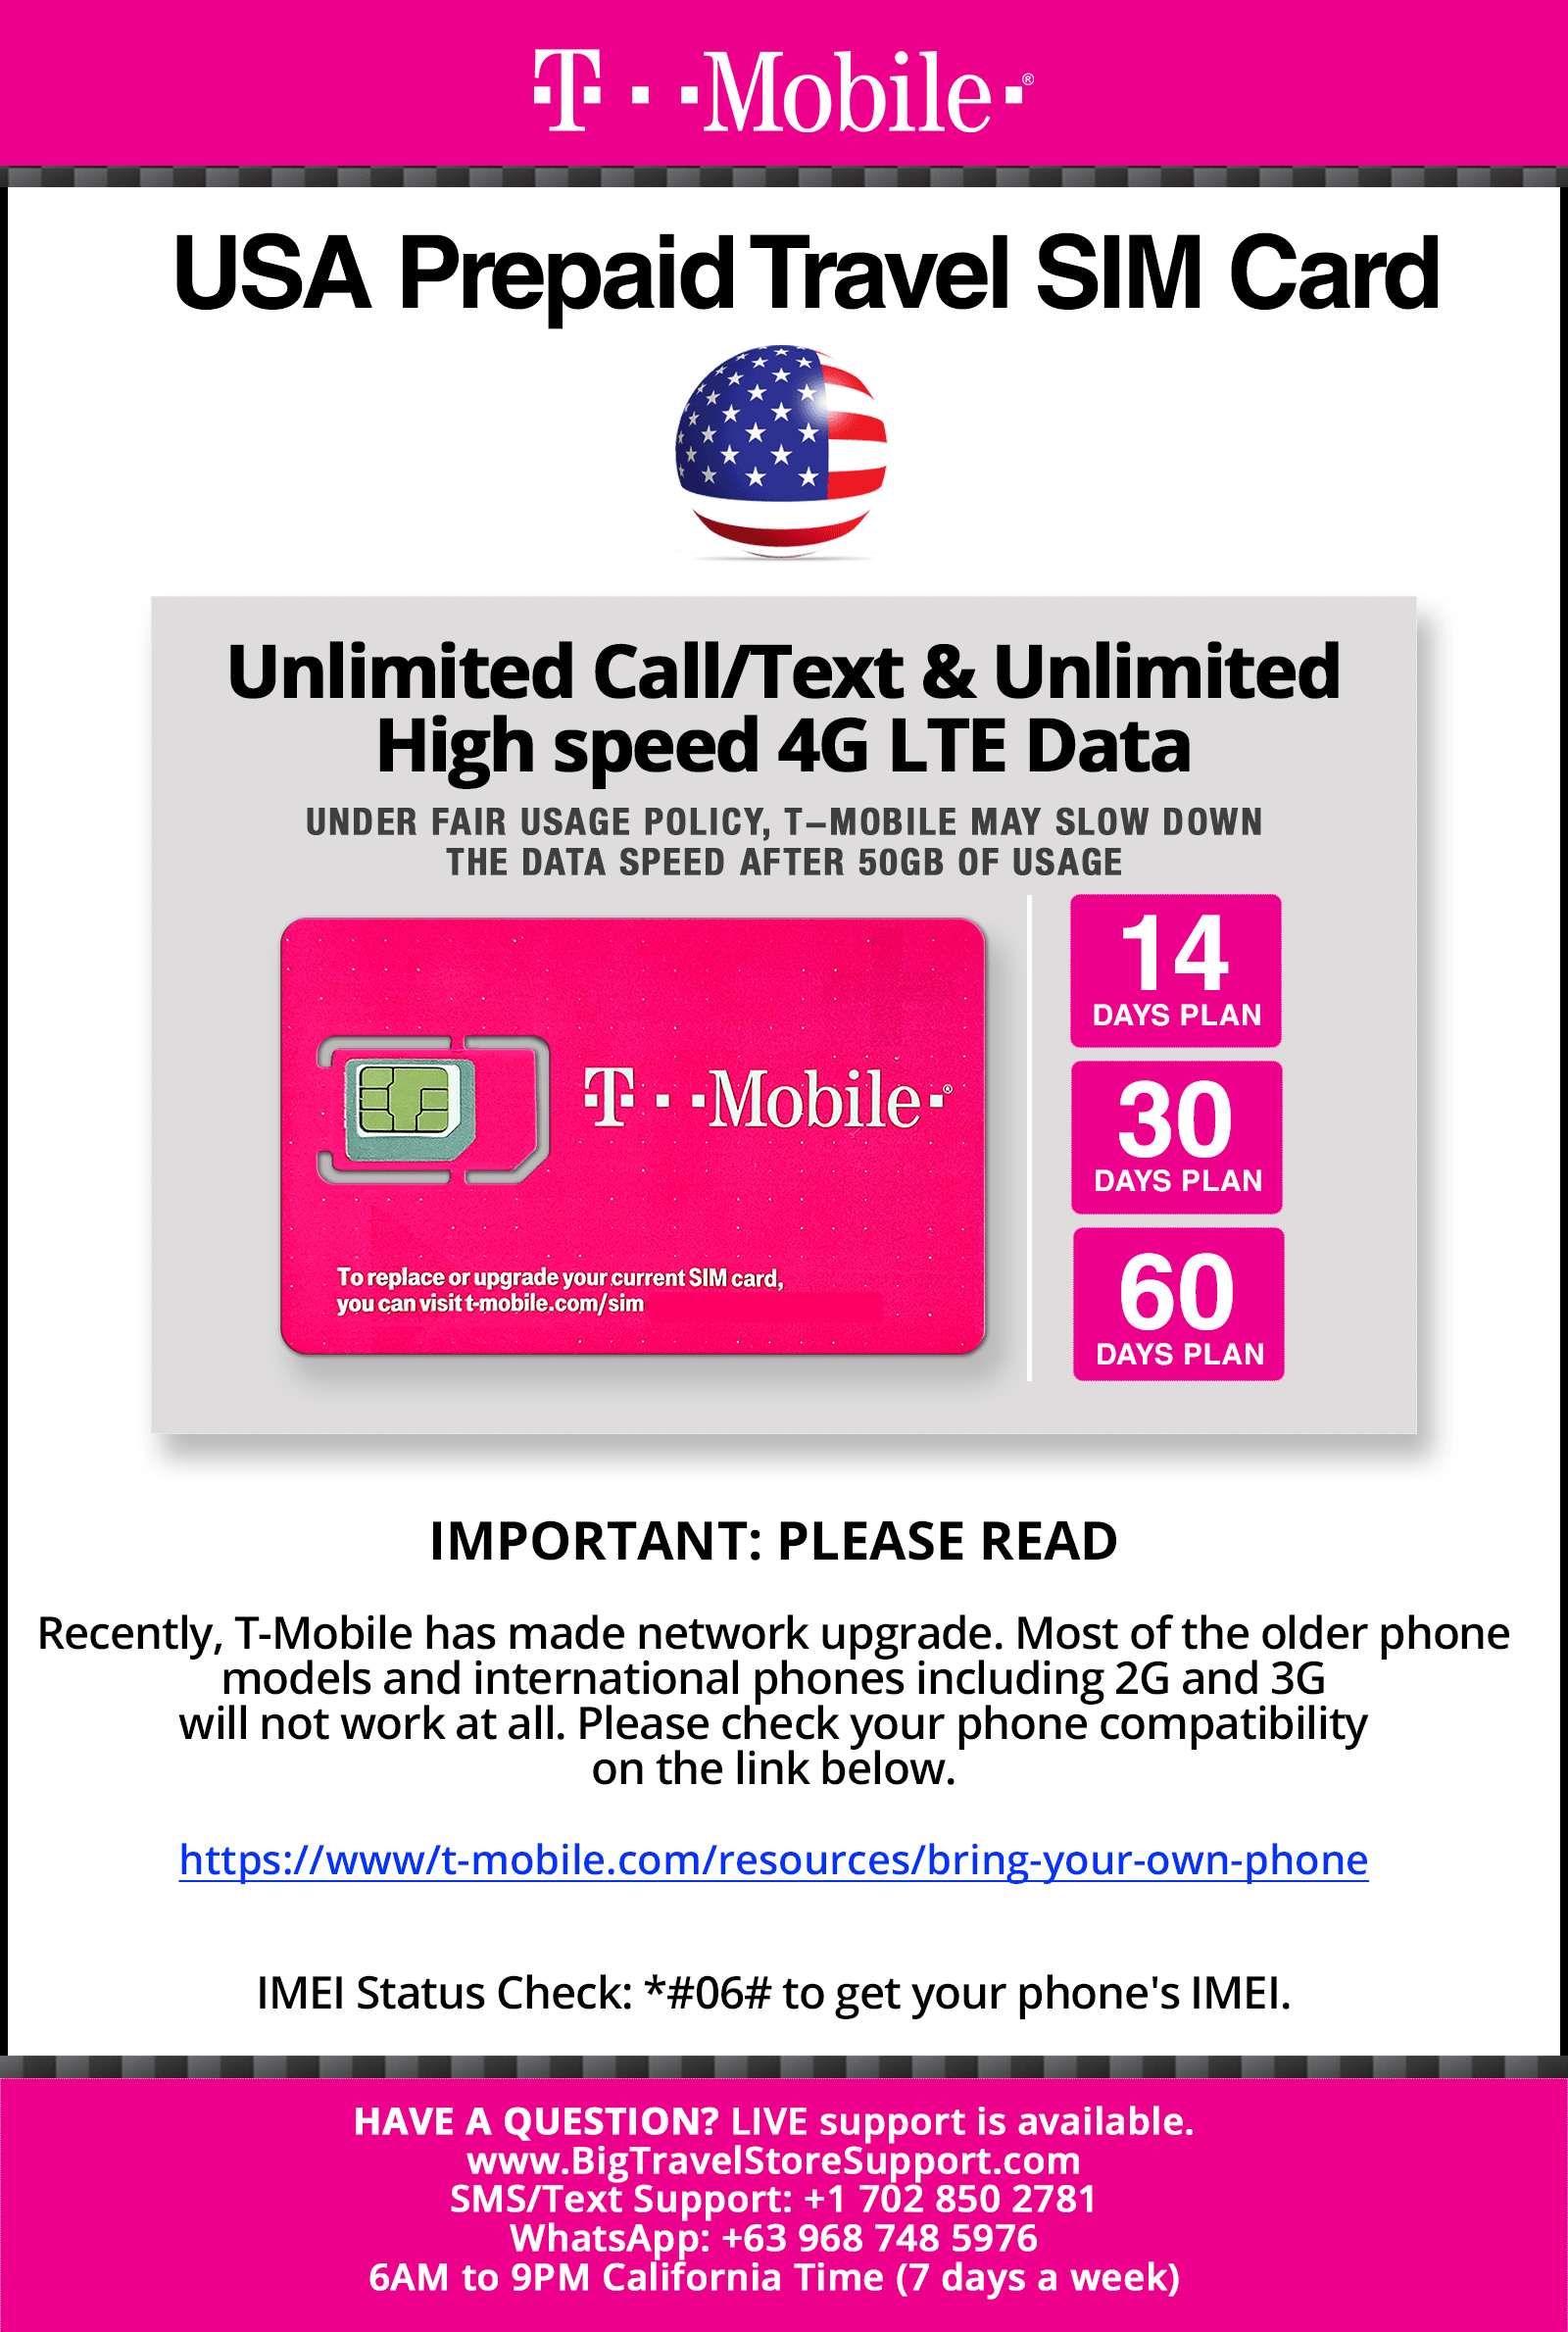 AT&T Prepaid Travel SIM Card Unlimited Call, Text and Data for 30